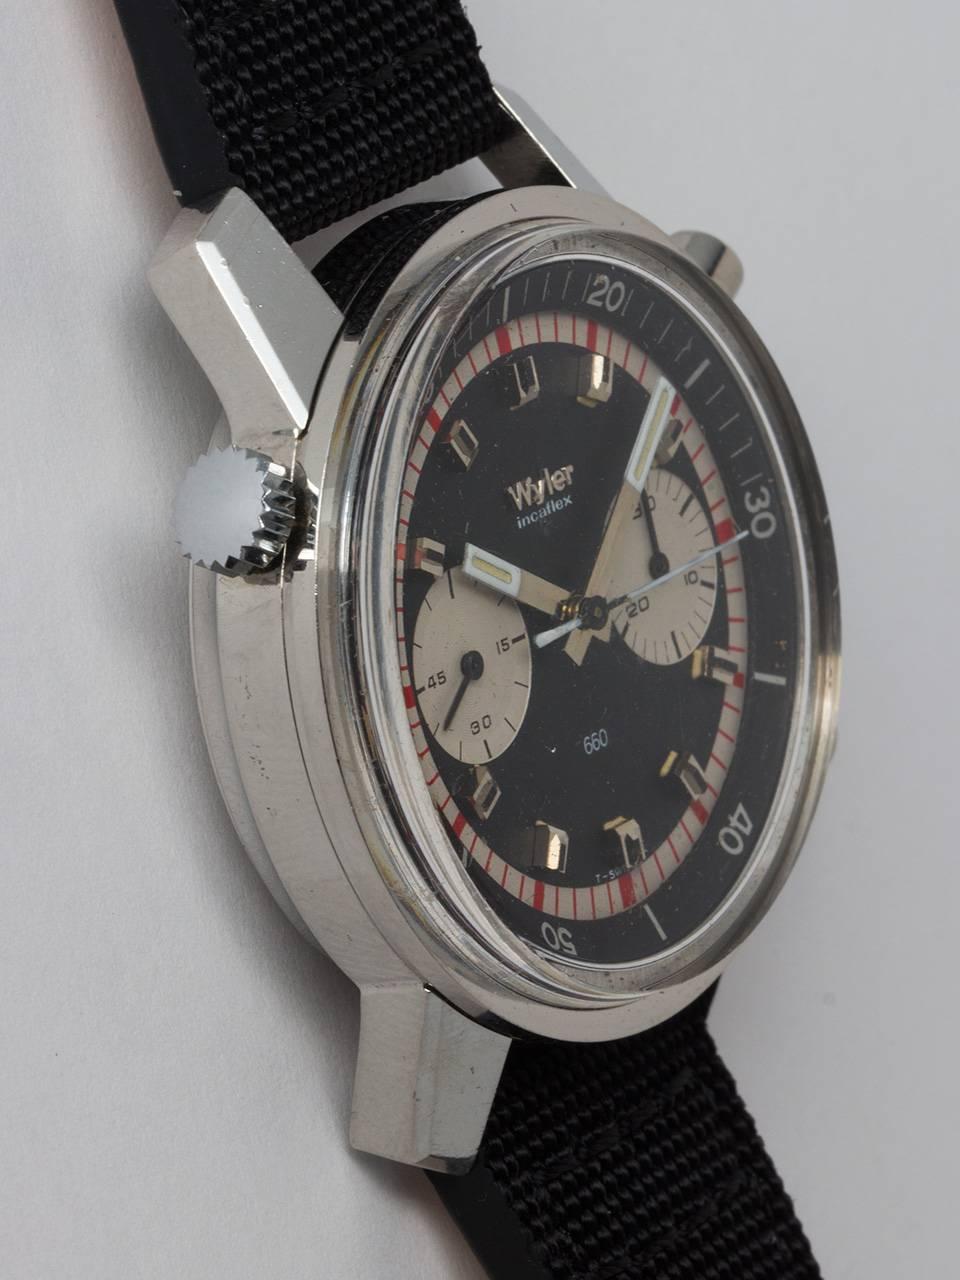 Wyler Stainless Steel Incaflex Chronograph circa 1960s. Great looking large model resembling the graphics of the famous Paul Newman Daytona. 40 x 46mm screw back case and inner elapsed time bezel. Original black dial with two contrasting white